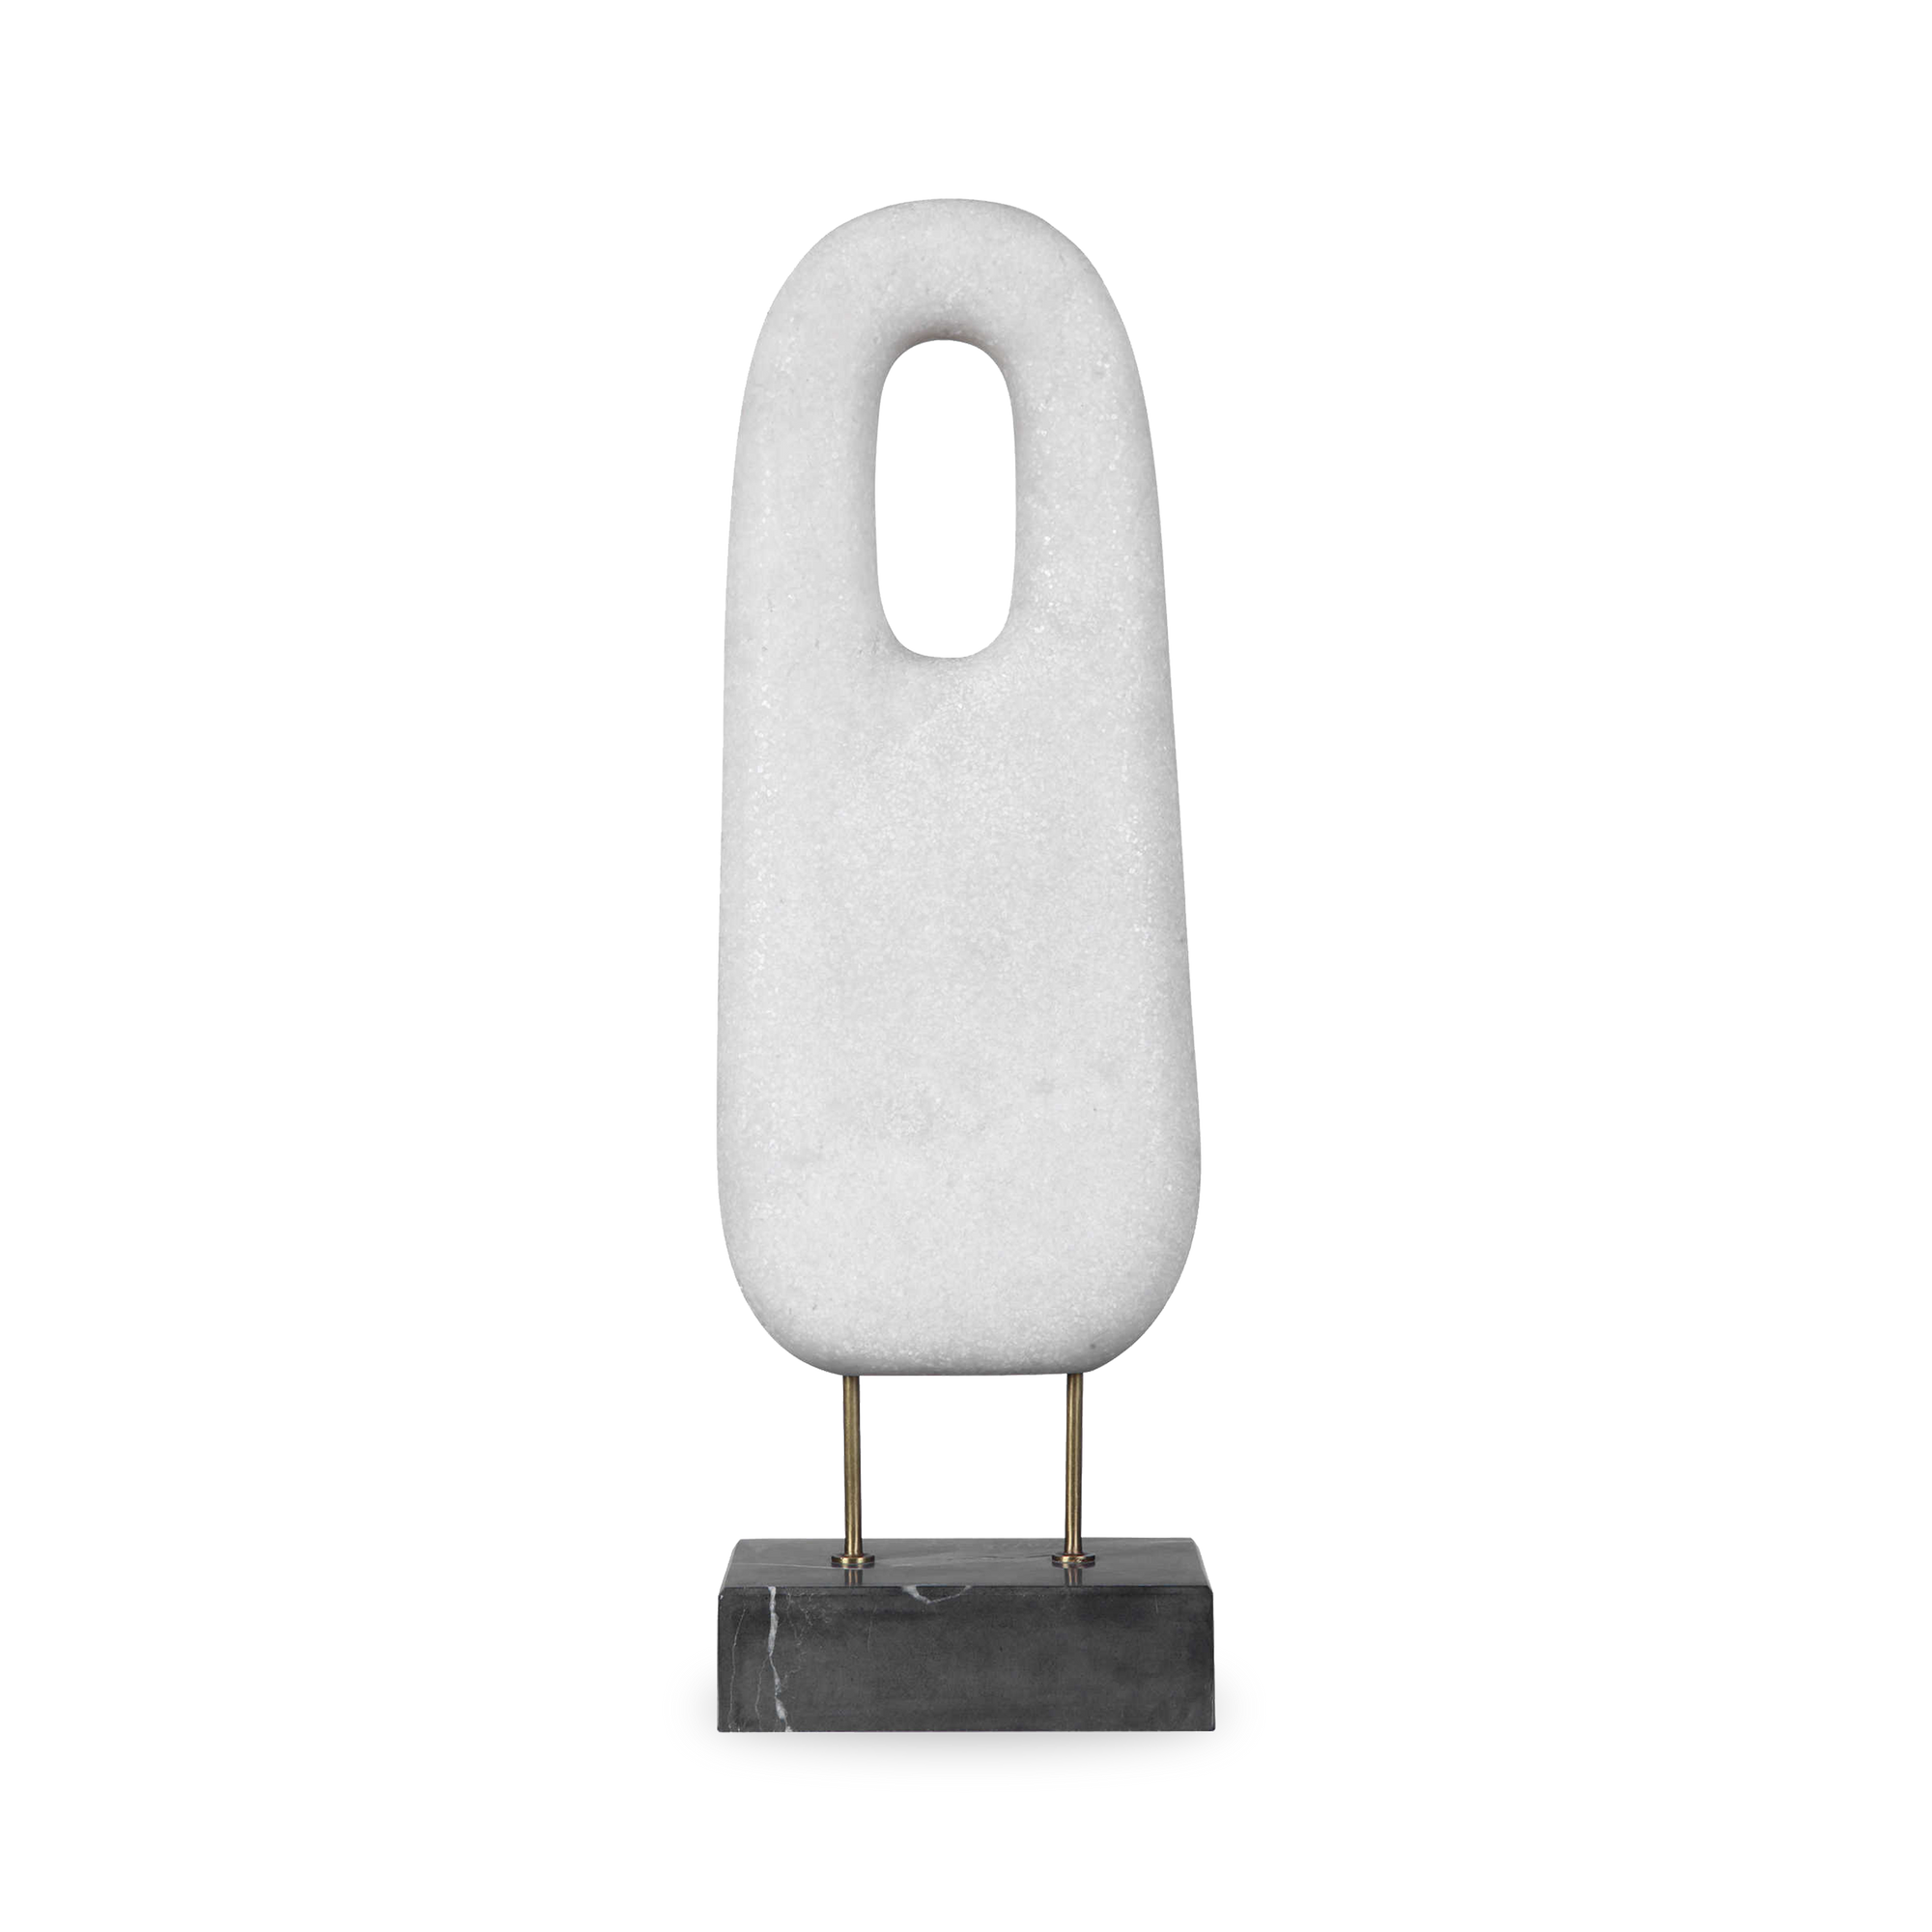 The monolithium shape is executed in marble that accurately replicates the look of Thassos marble with a honed black marble base and brass pegs.